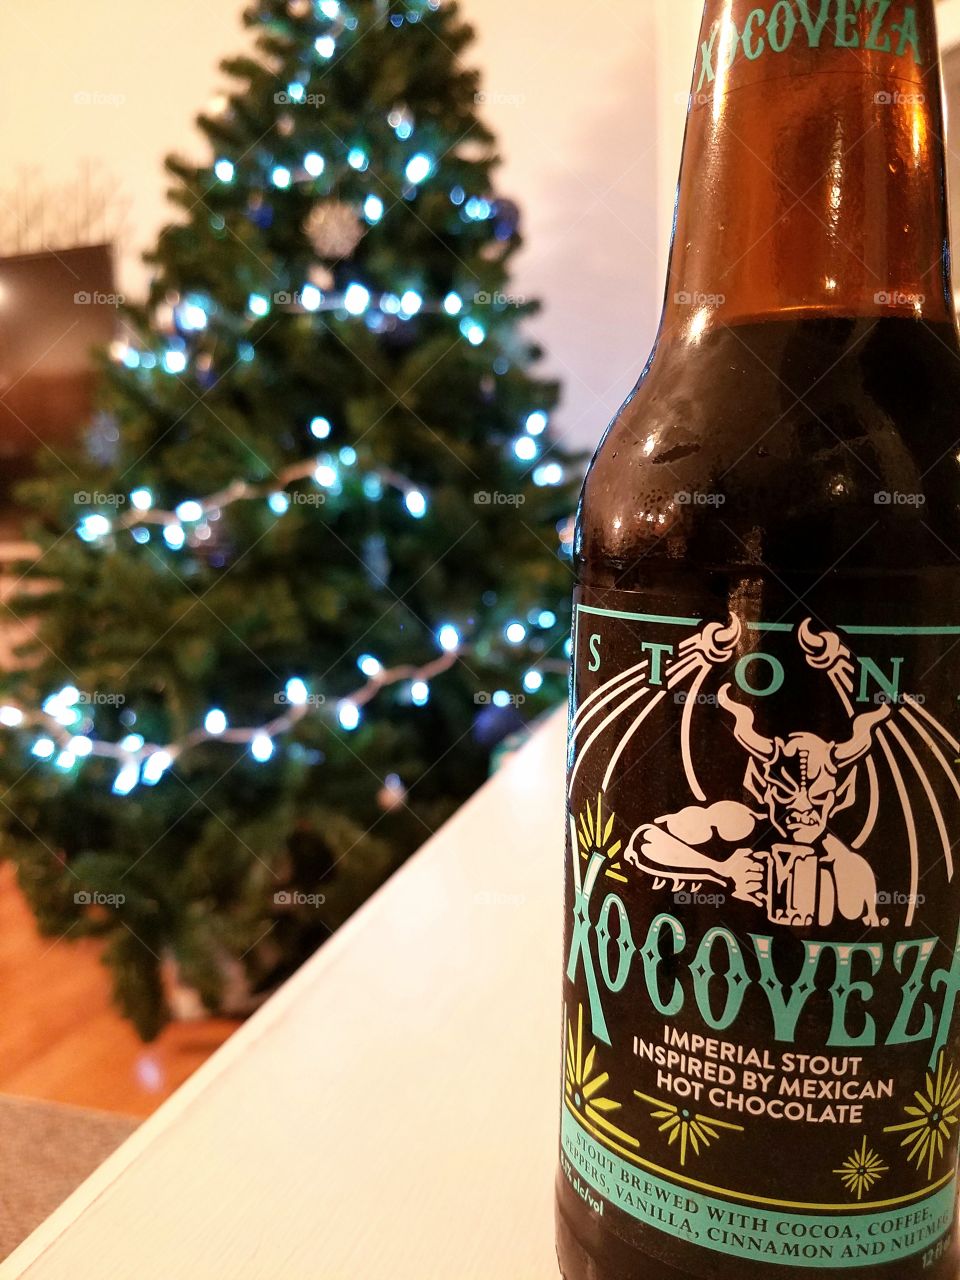 A favorite imperial porter and the Christmas tree